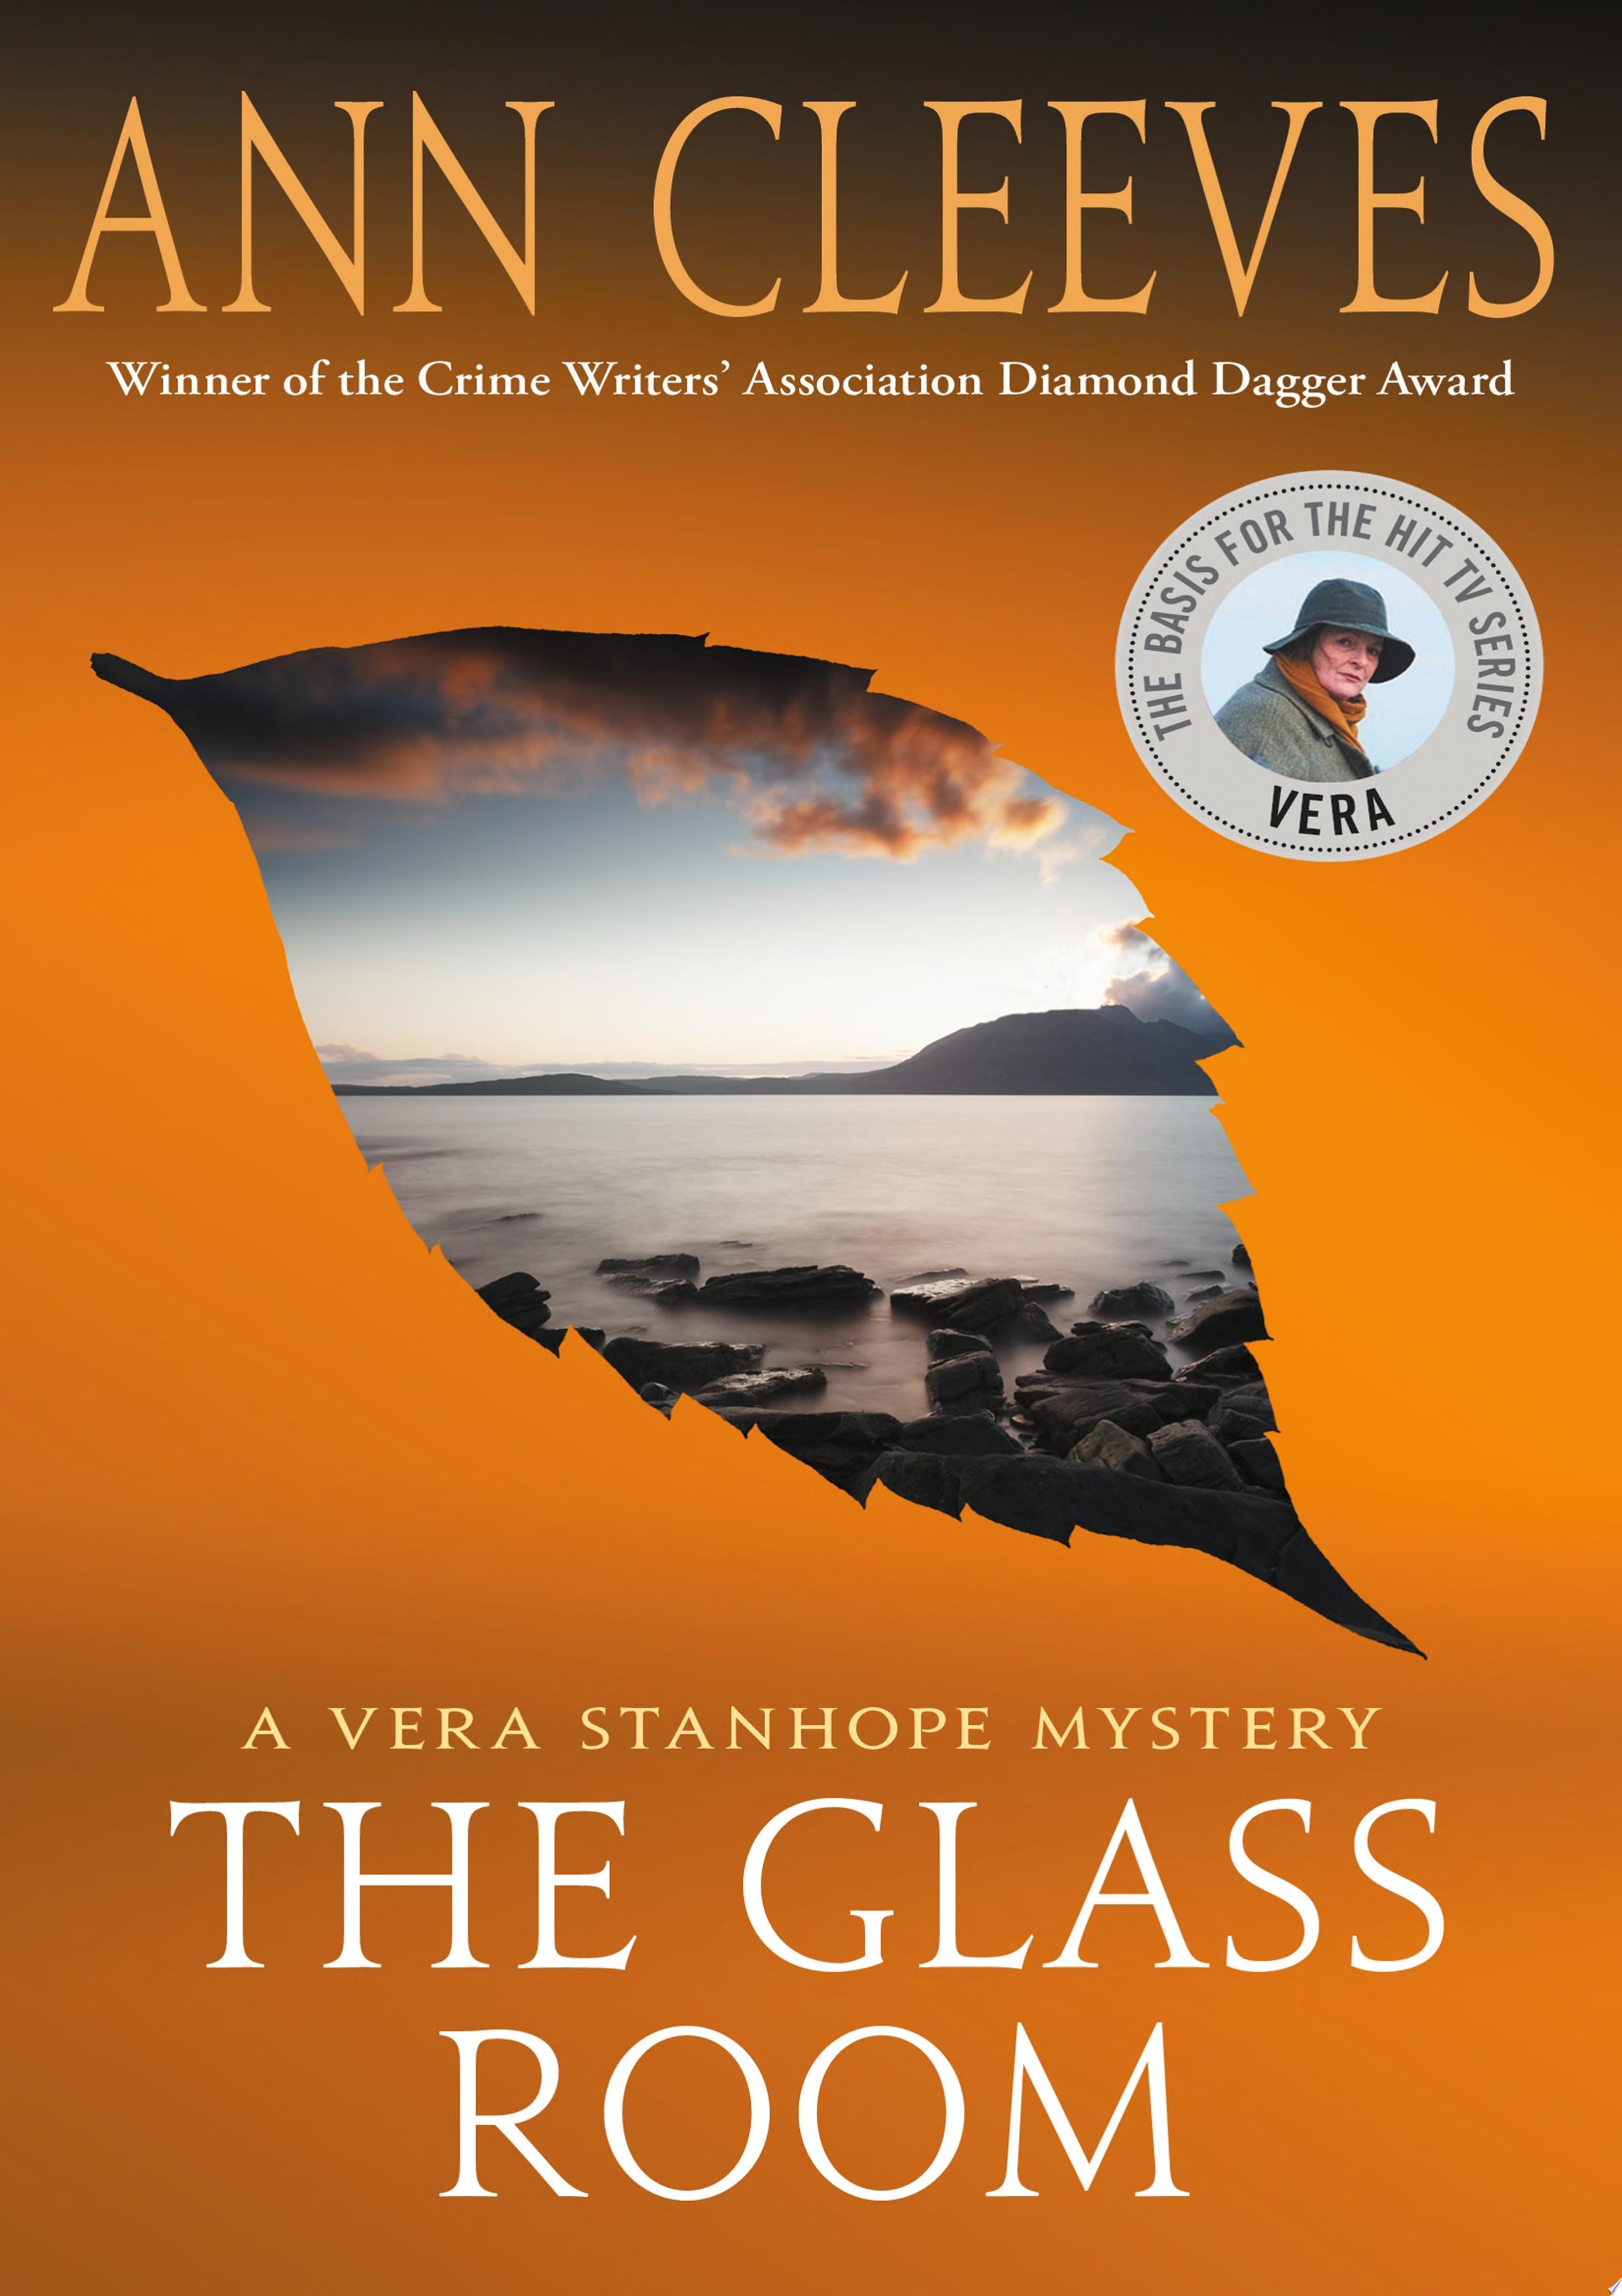 Image for "The Glass Room"